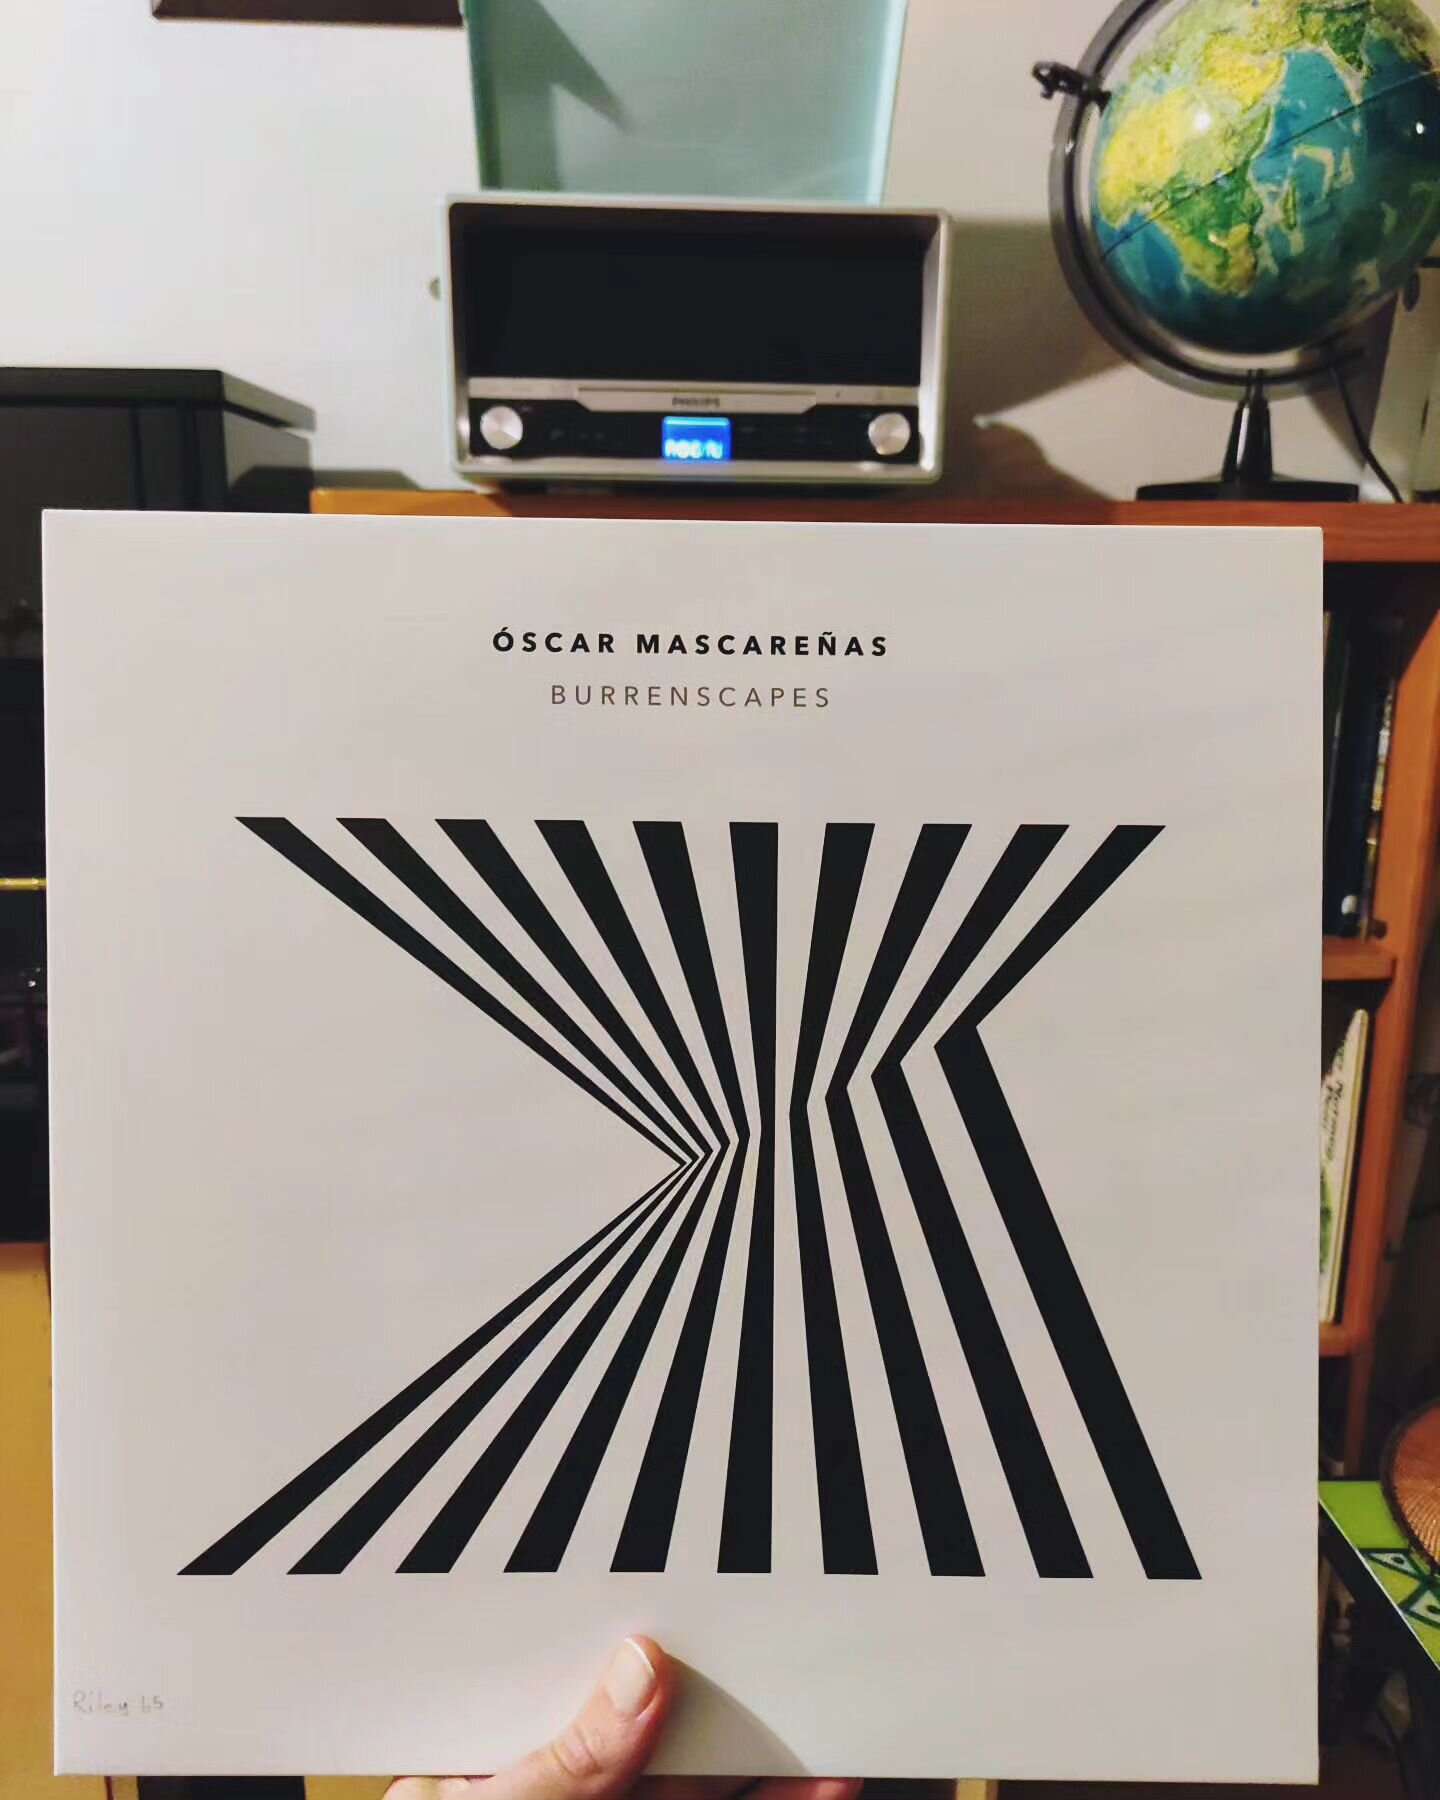 &Oacute;scar Mascare&ntilde;as released his
album Burrenscapes (@diatriberecords 2022) with a stunning performance at @newmusicdublin last year. 

It features the sounds of birds, lakes
and the Atlantic ocean recorded in the Burren region in Co. Cl